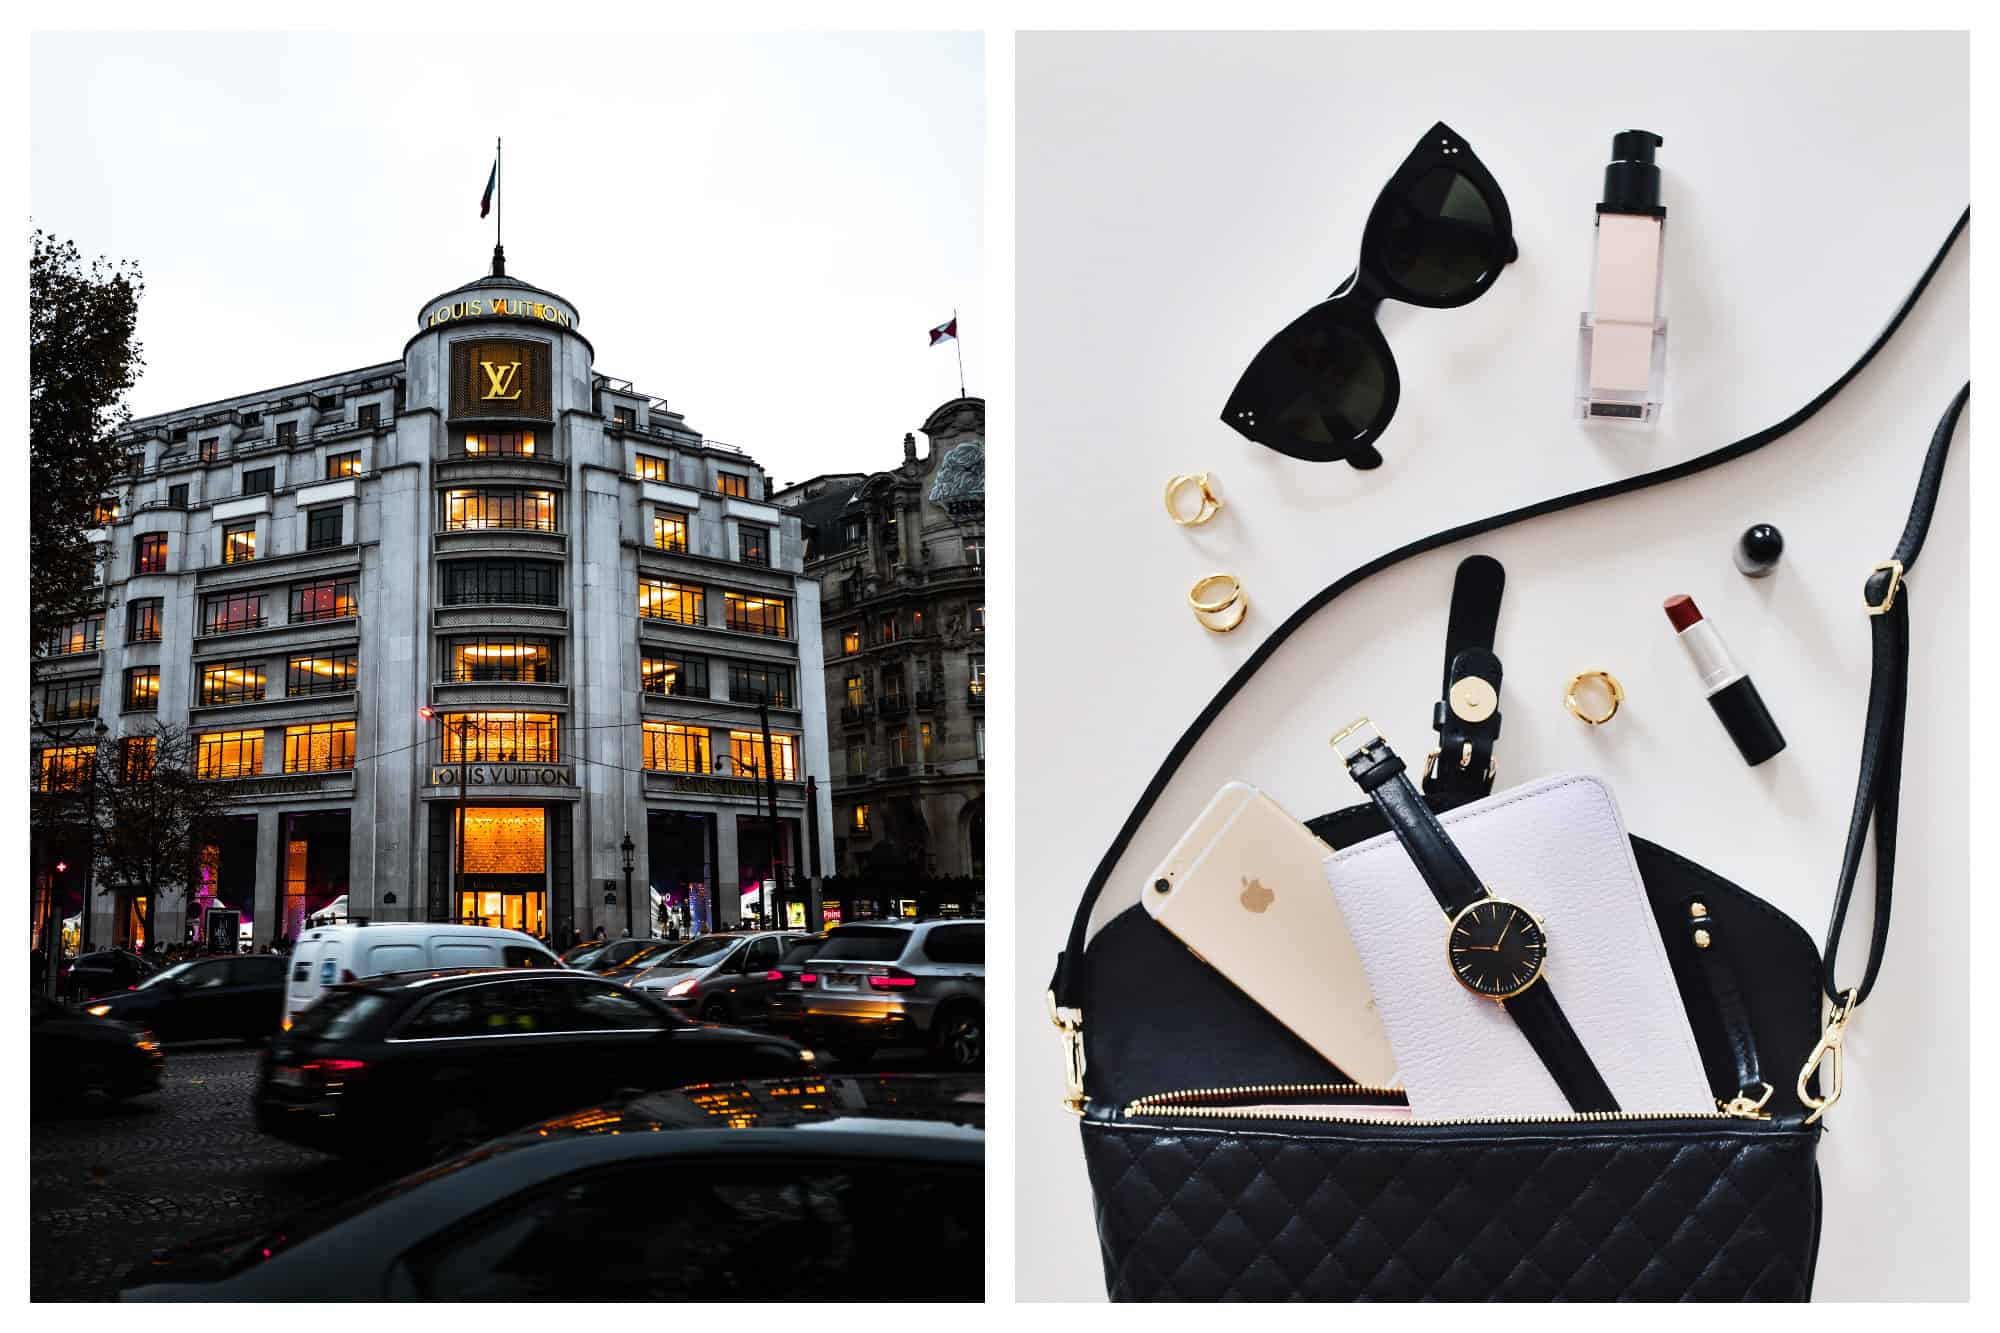 Louis Vuitton on the Champs Elysées is the temple of shopping in Paris with queues often snaking right around the corner (left). Make sure you know where to shop in Paris for your makeup essentials (right).